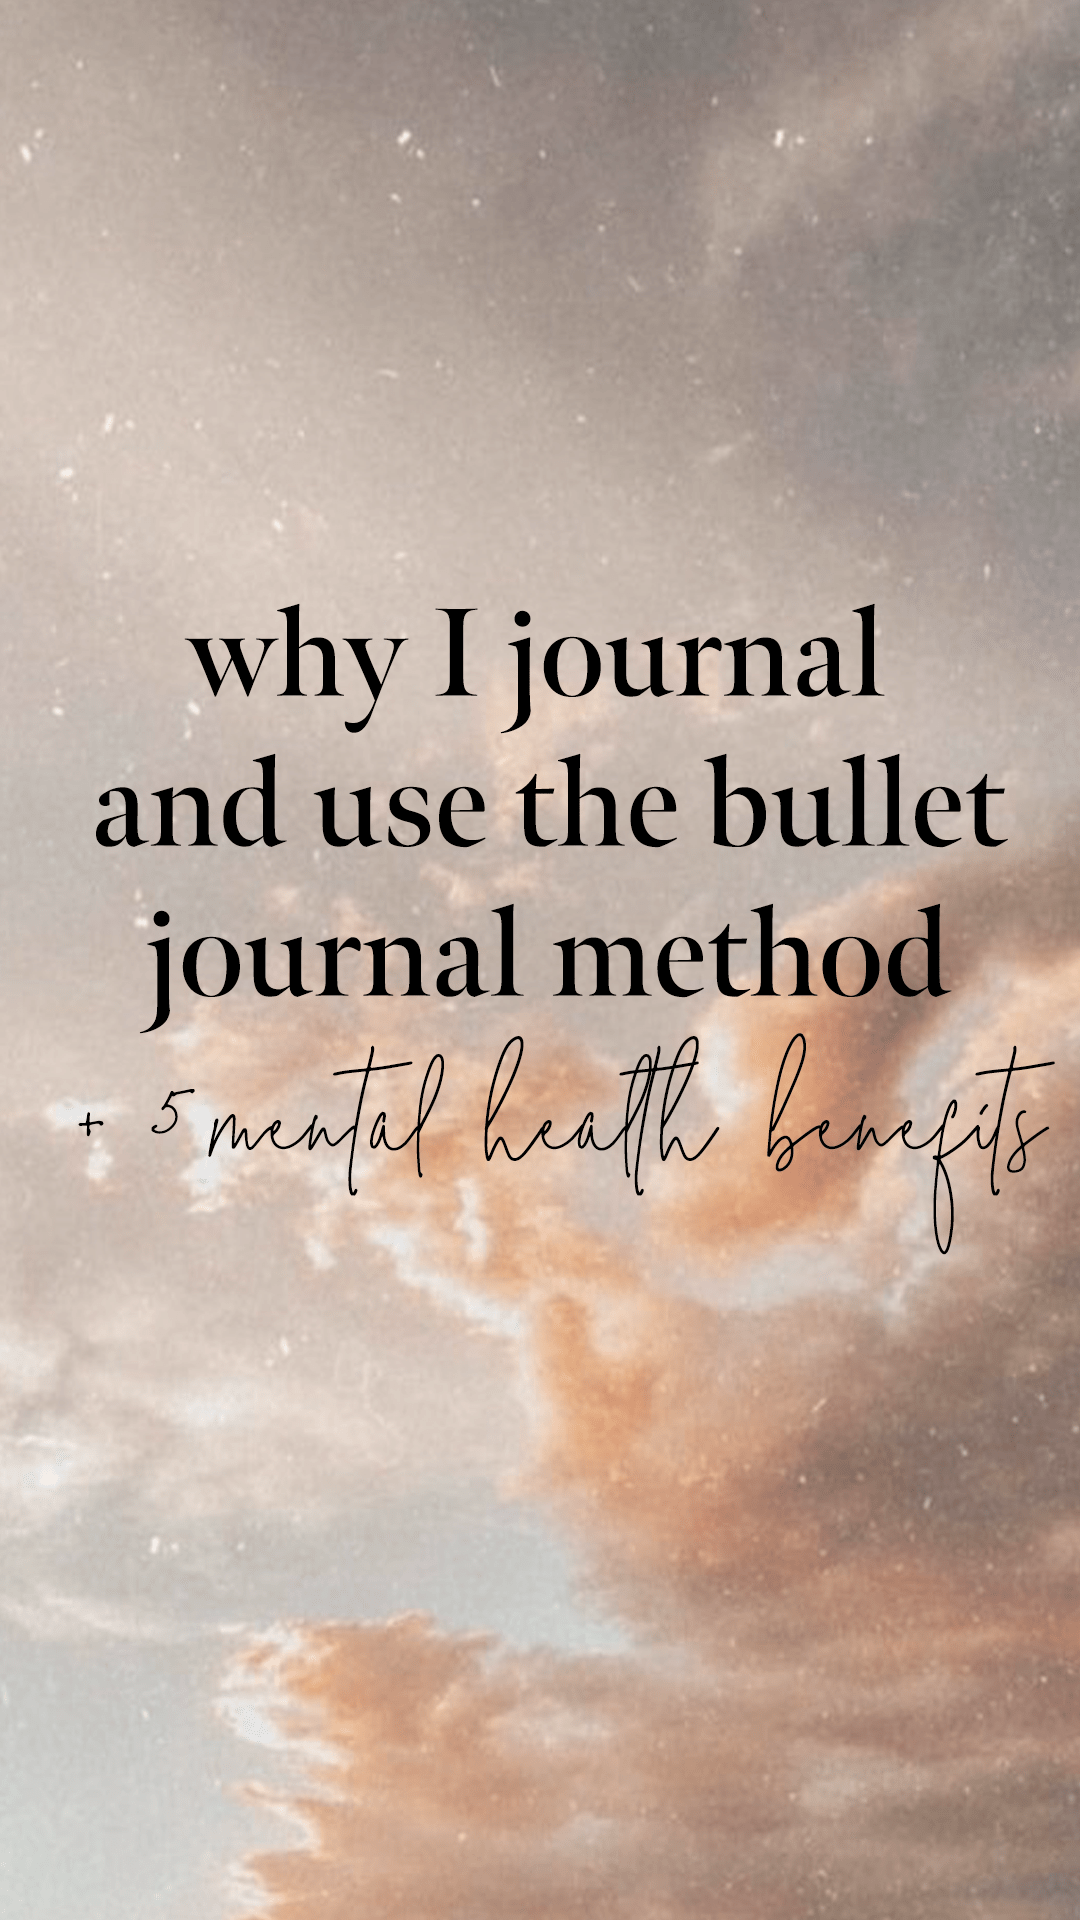 Why I Use the Bullet Journal